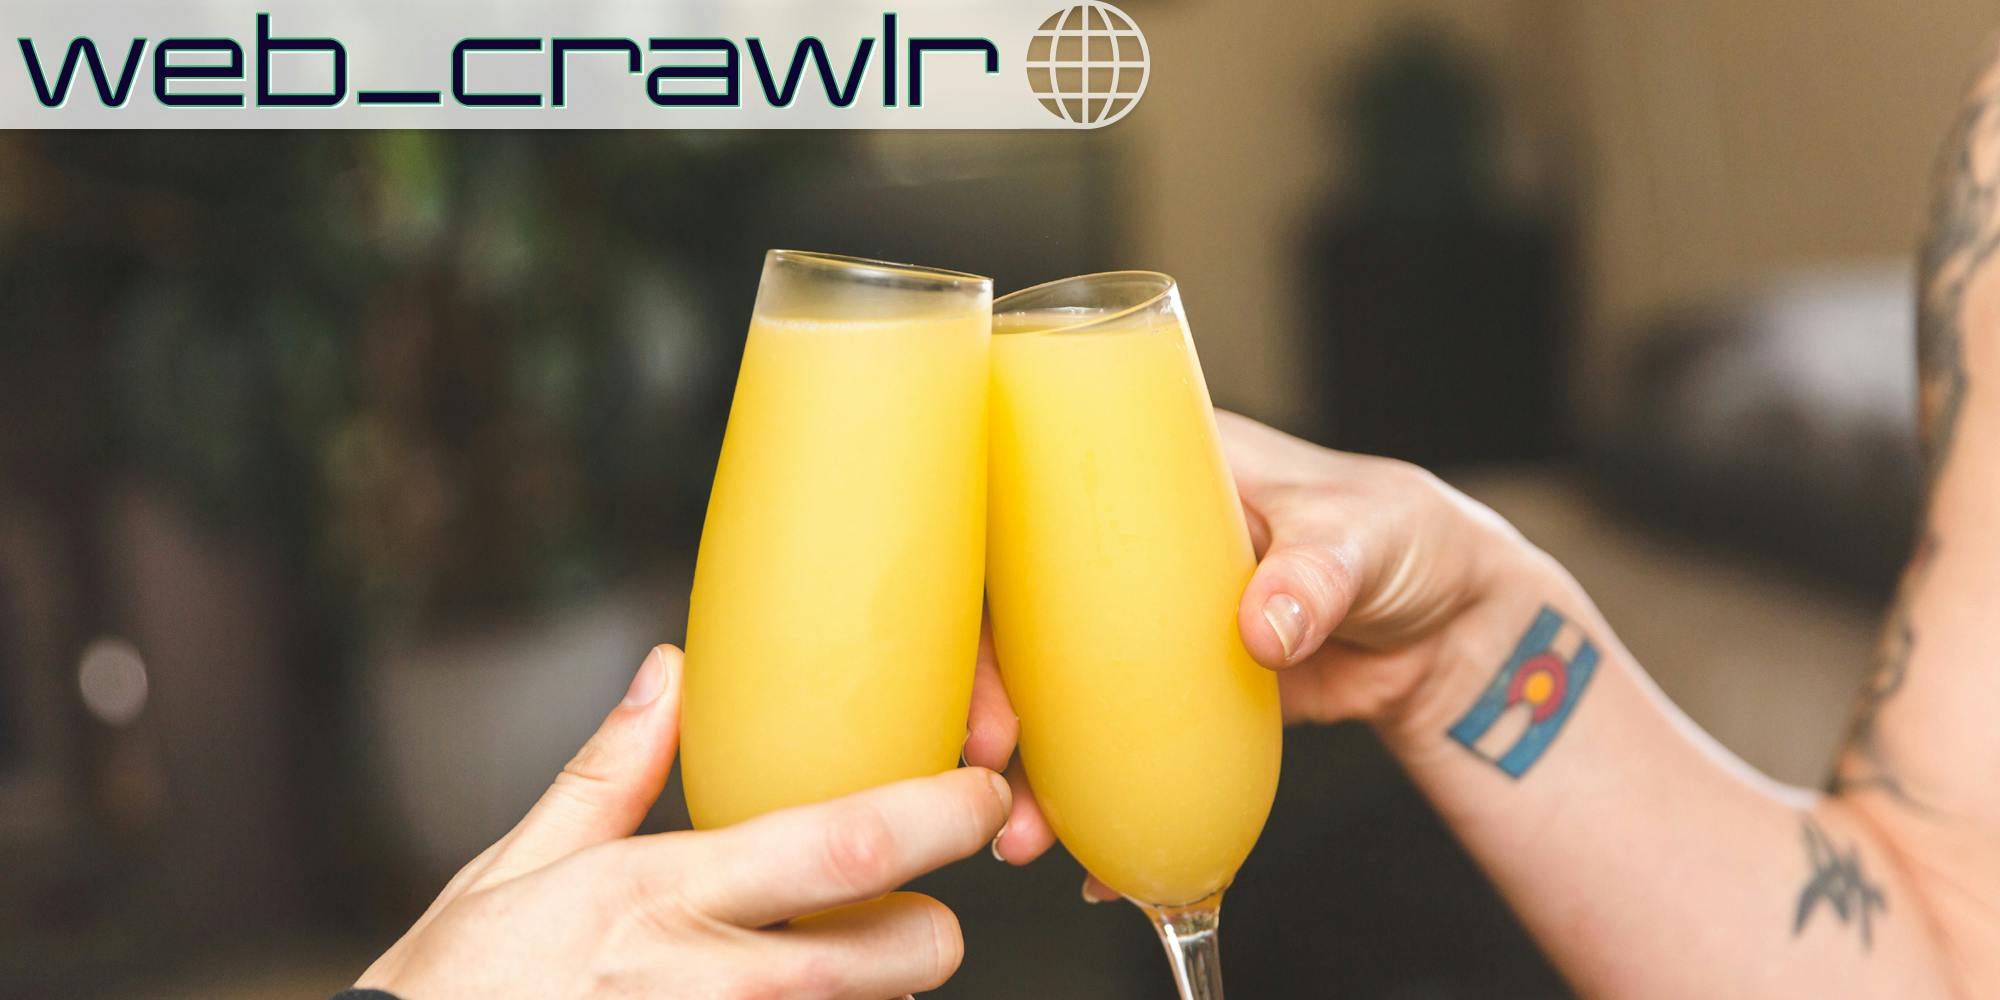 Two glasses of mimosa being tapped together. The Daily Dot newsletter web_crawlr logo is in the top left corner.